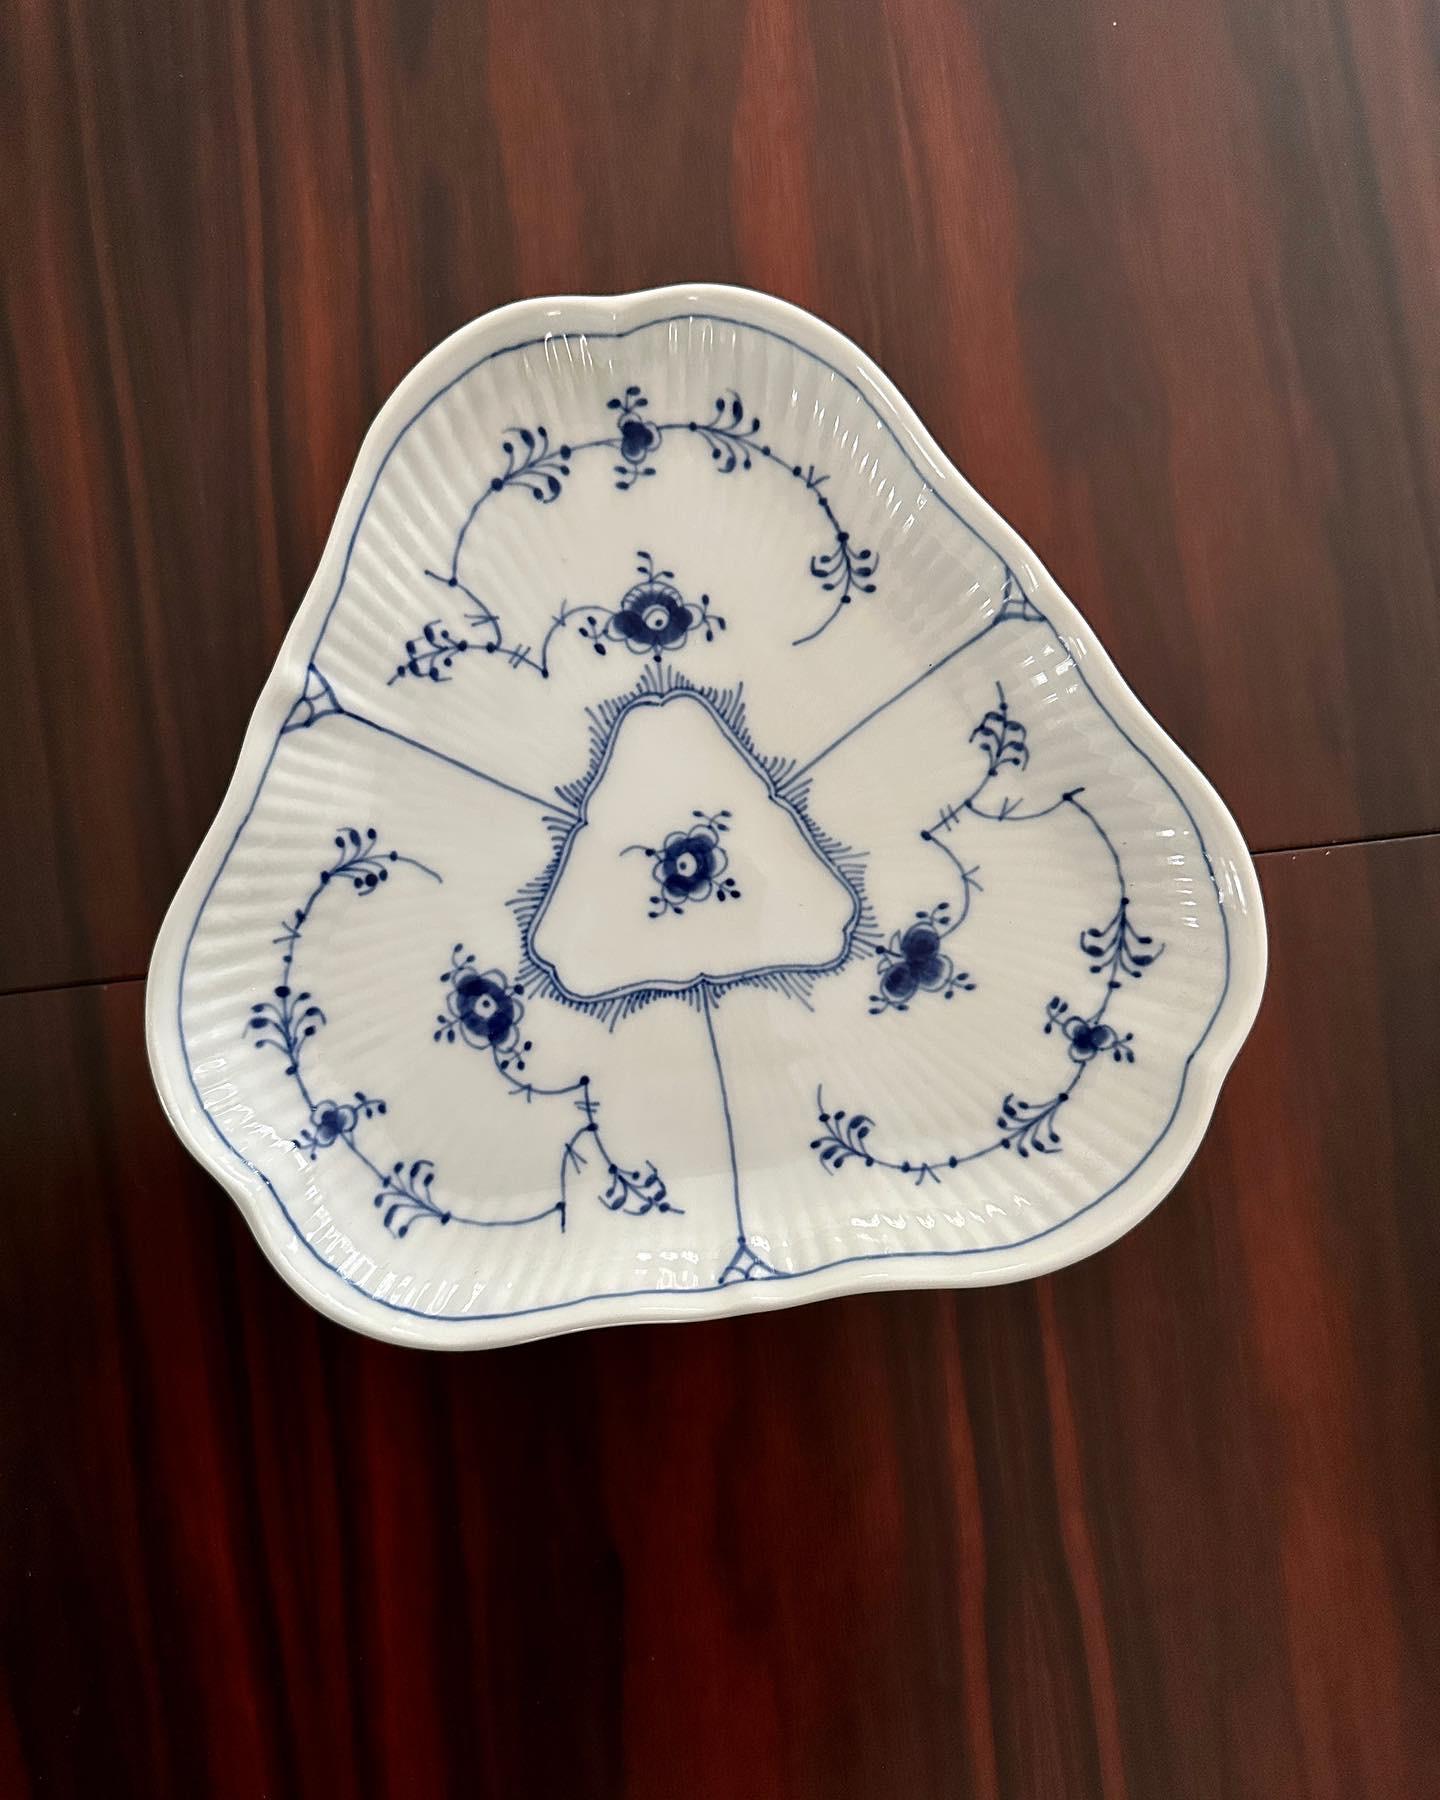 A blue/white fluted pickle dish from Royal Copenhagen.  The design was based on an antique chinese pattern and was created in 1775 by Royal Copenhagen.  Arnold Krog, the artistic director of Royal Copenhagen from 1884 to 1916, revised the design in